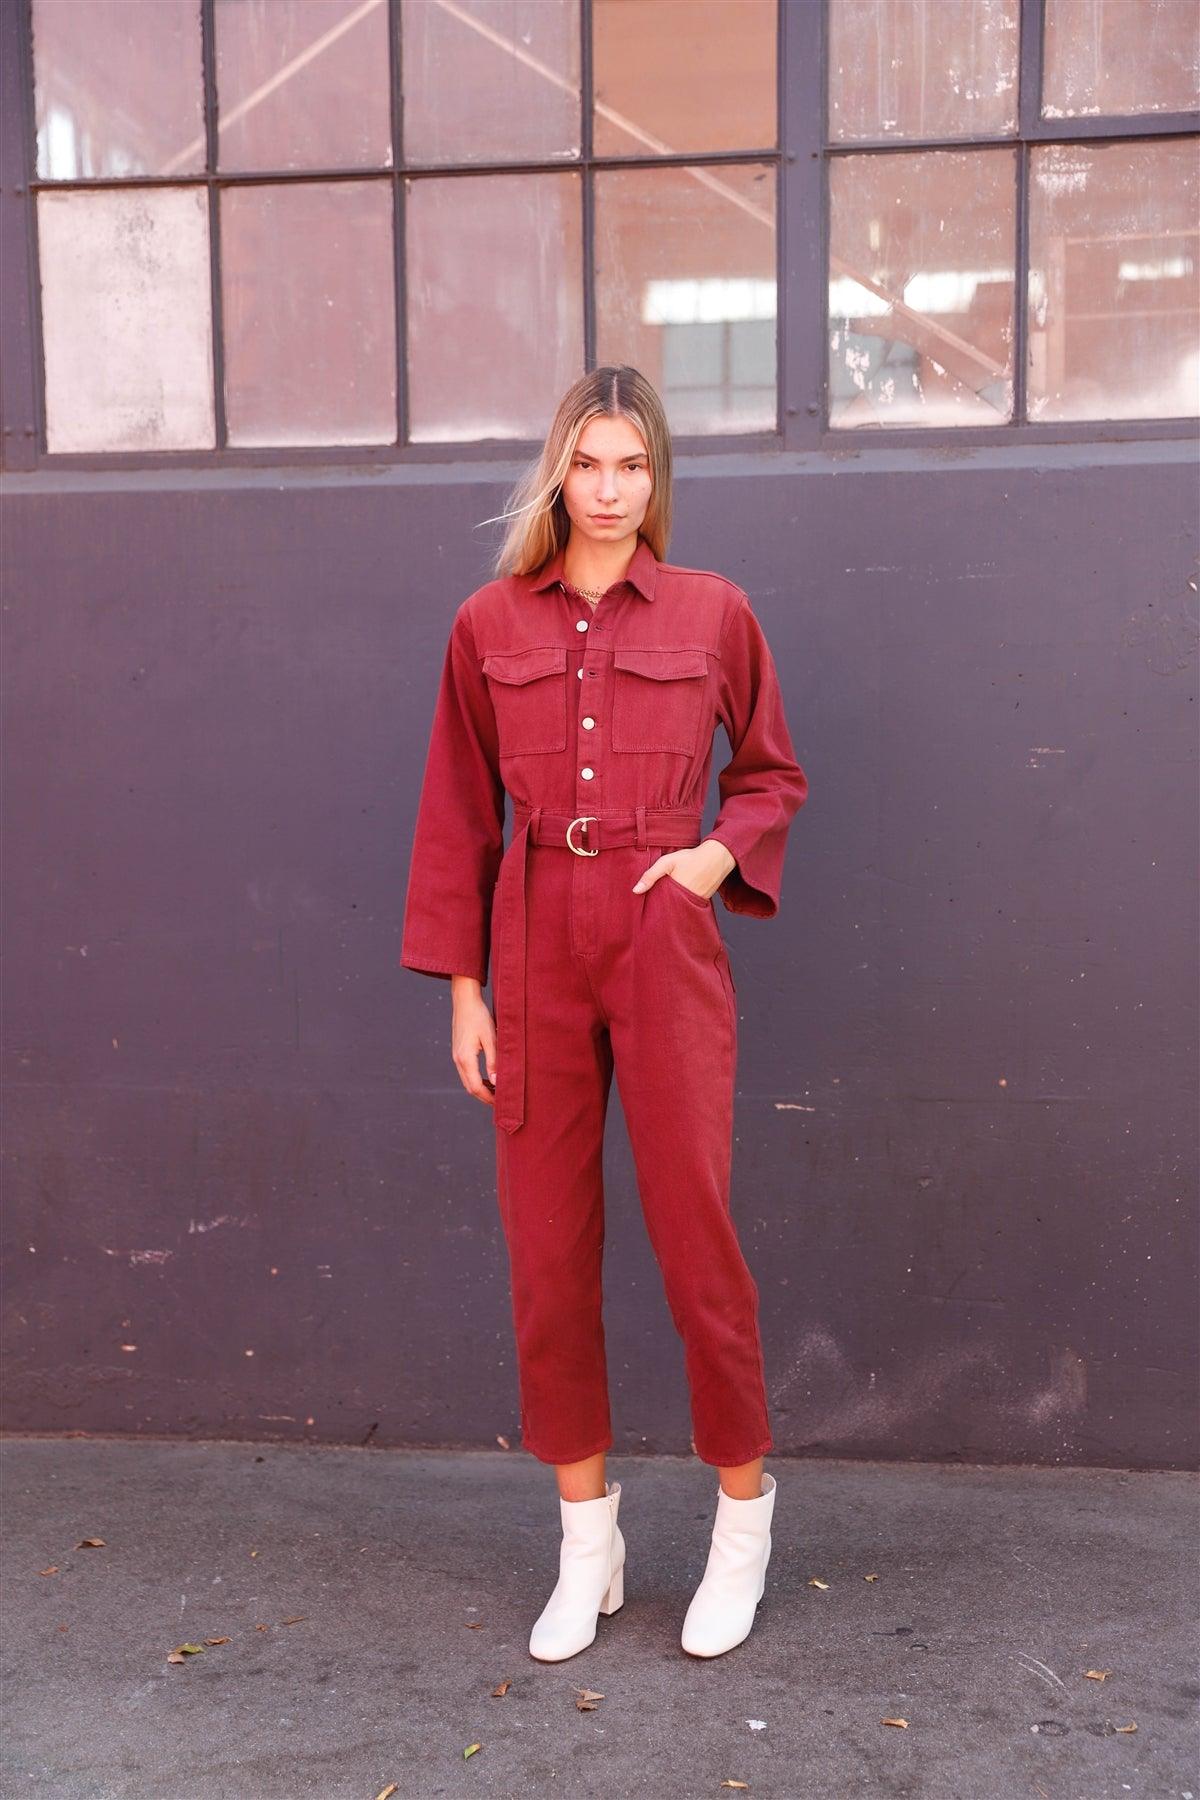 Burgundy Long Sleeve Denim Utility Front Button Down Self-Tie Belted Jumpsuit /3-2-1